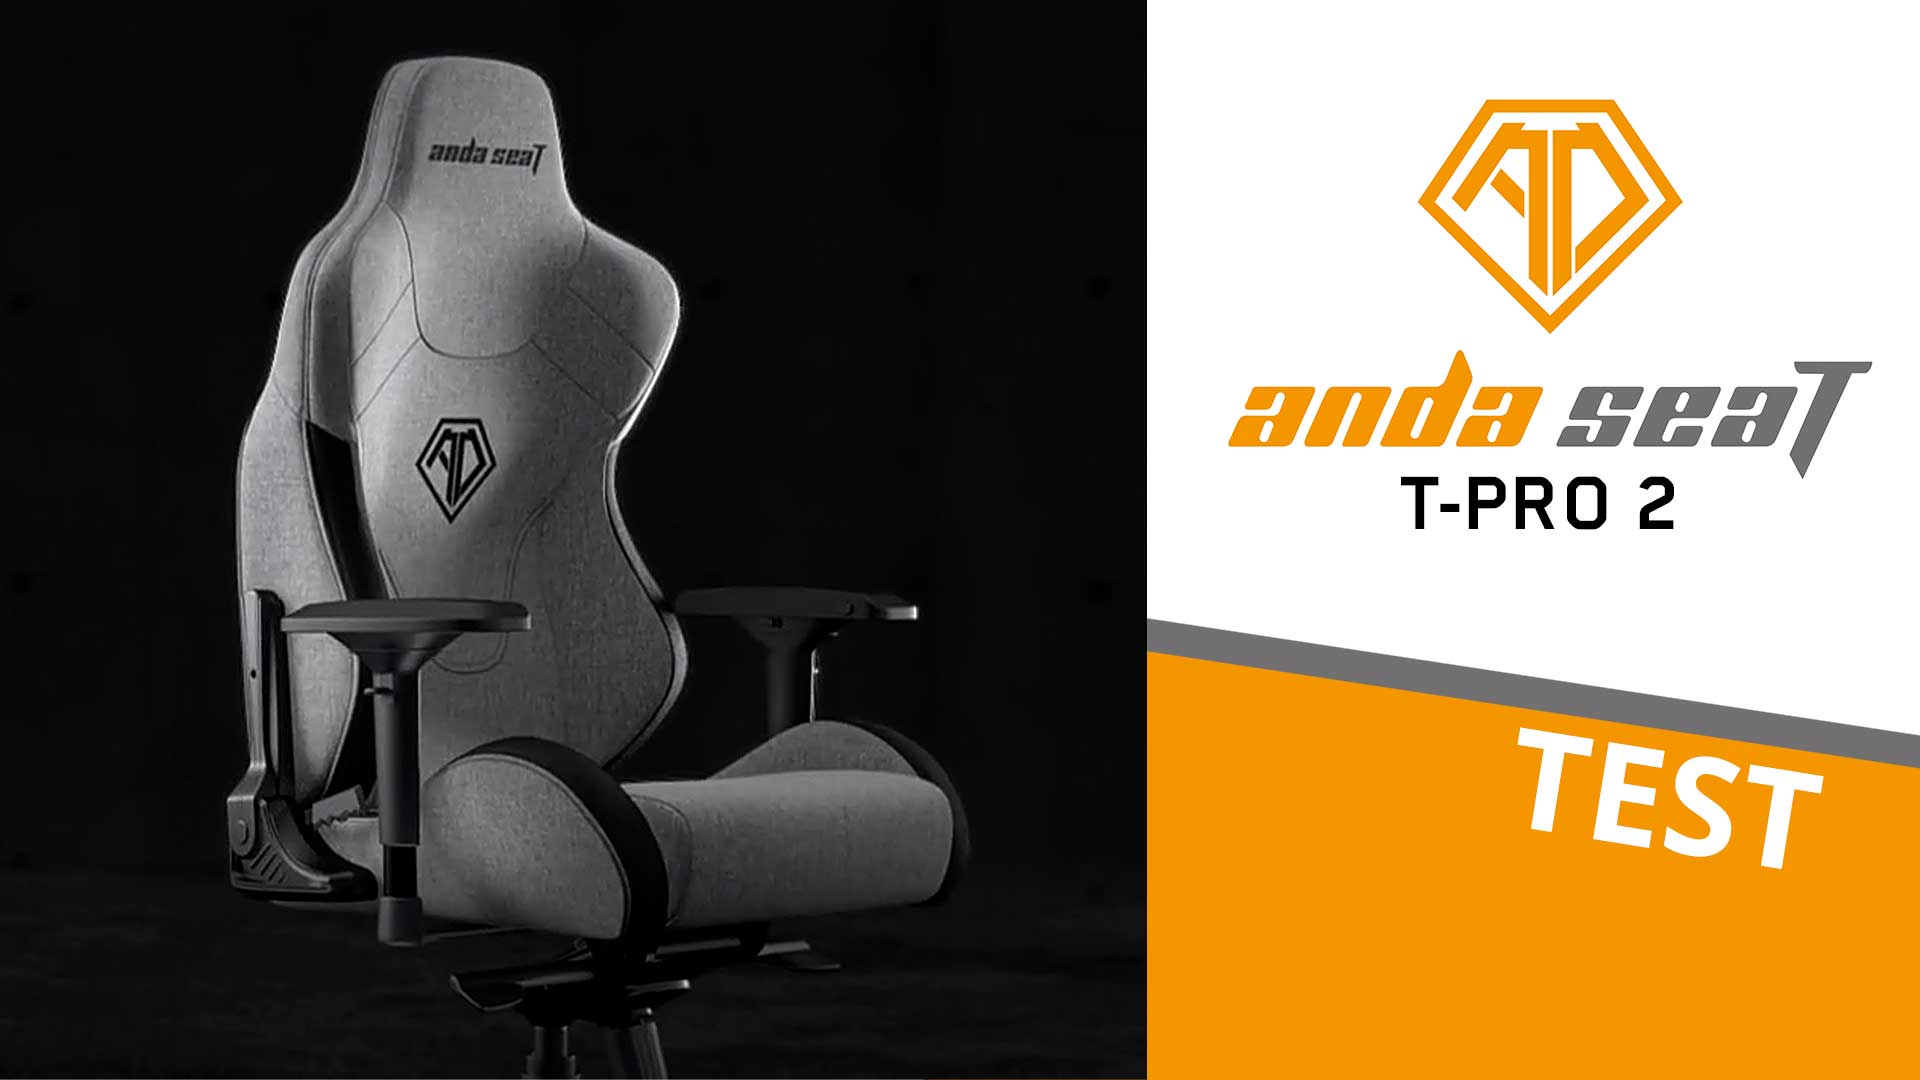 andaseat t pro 2 test